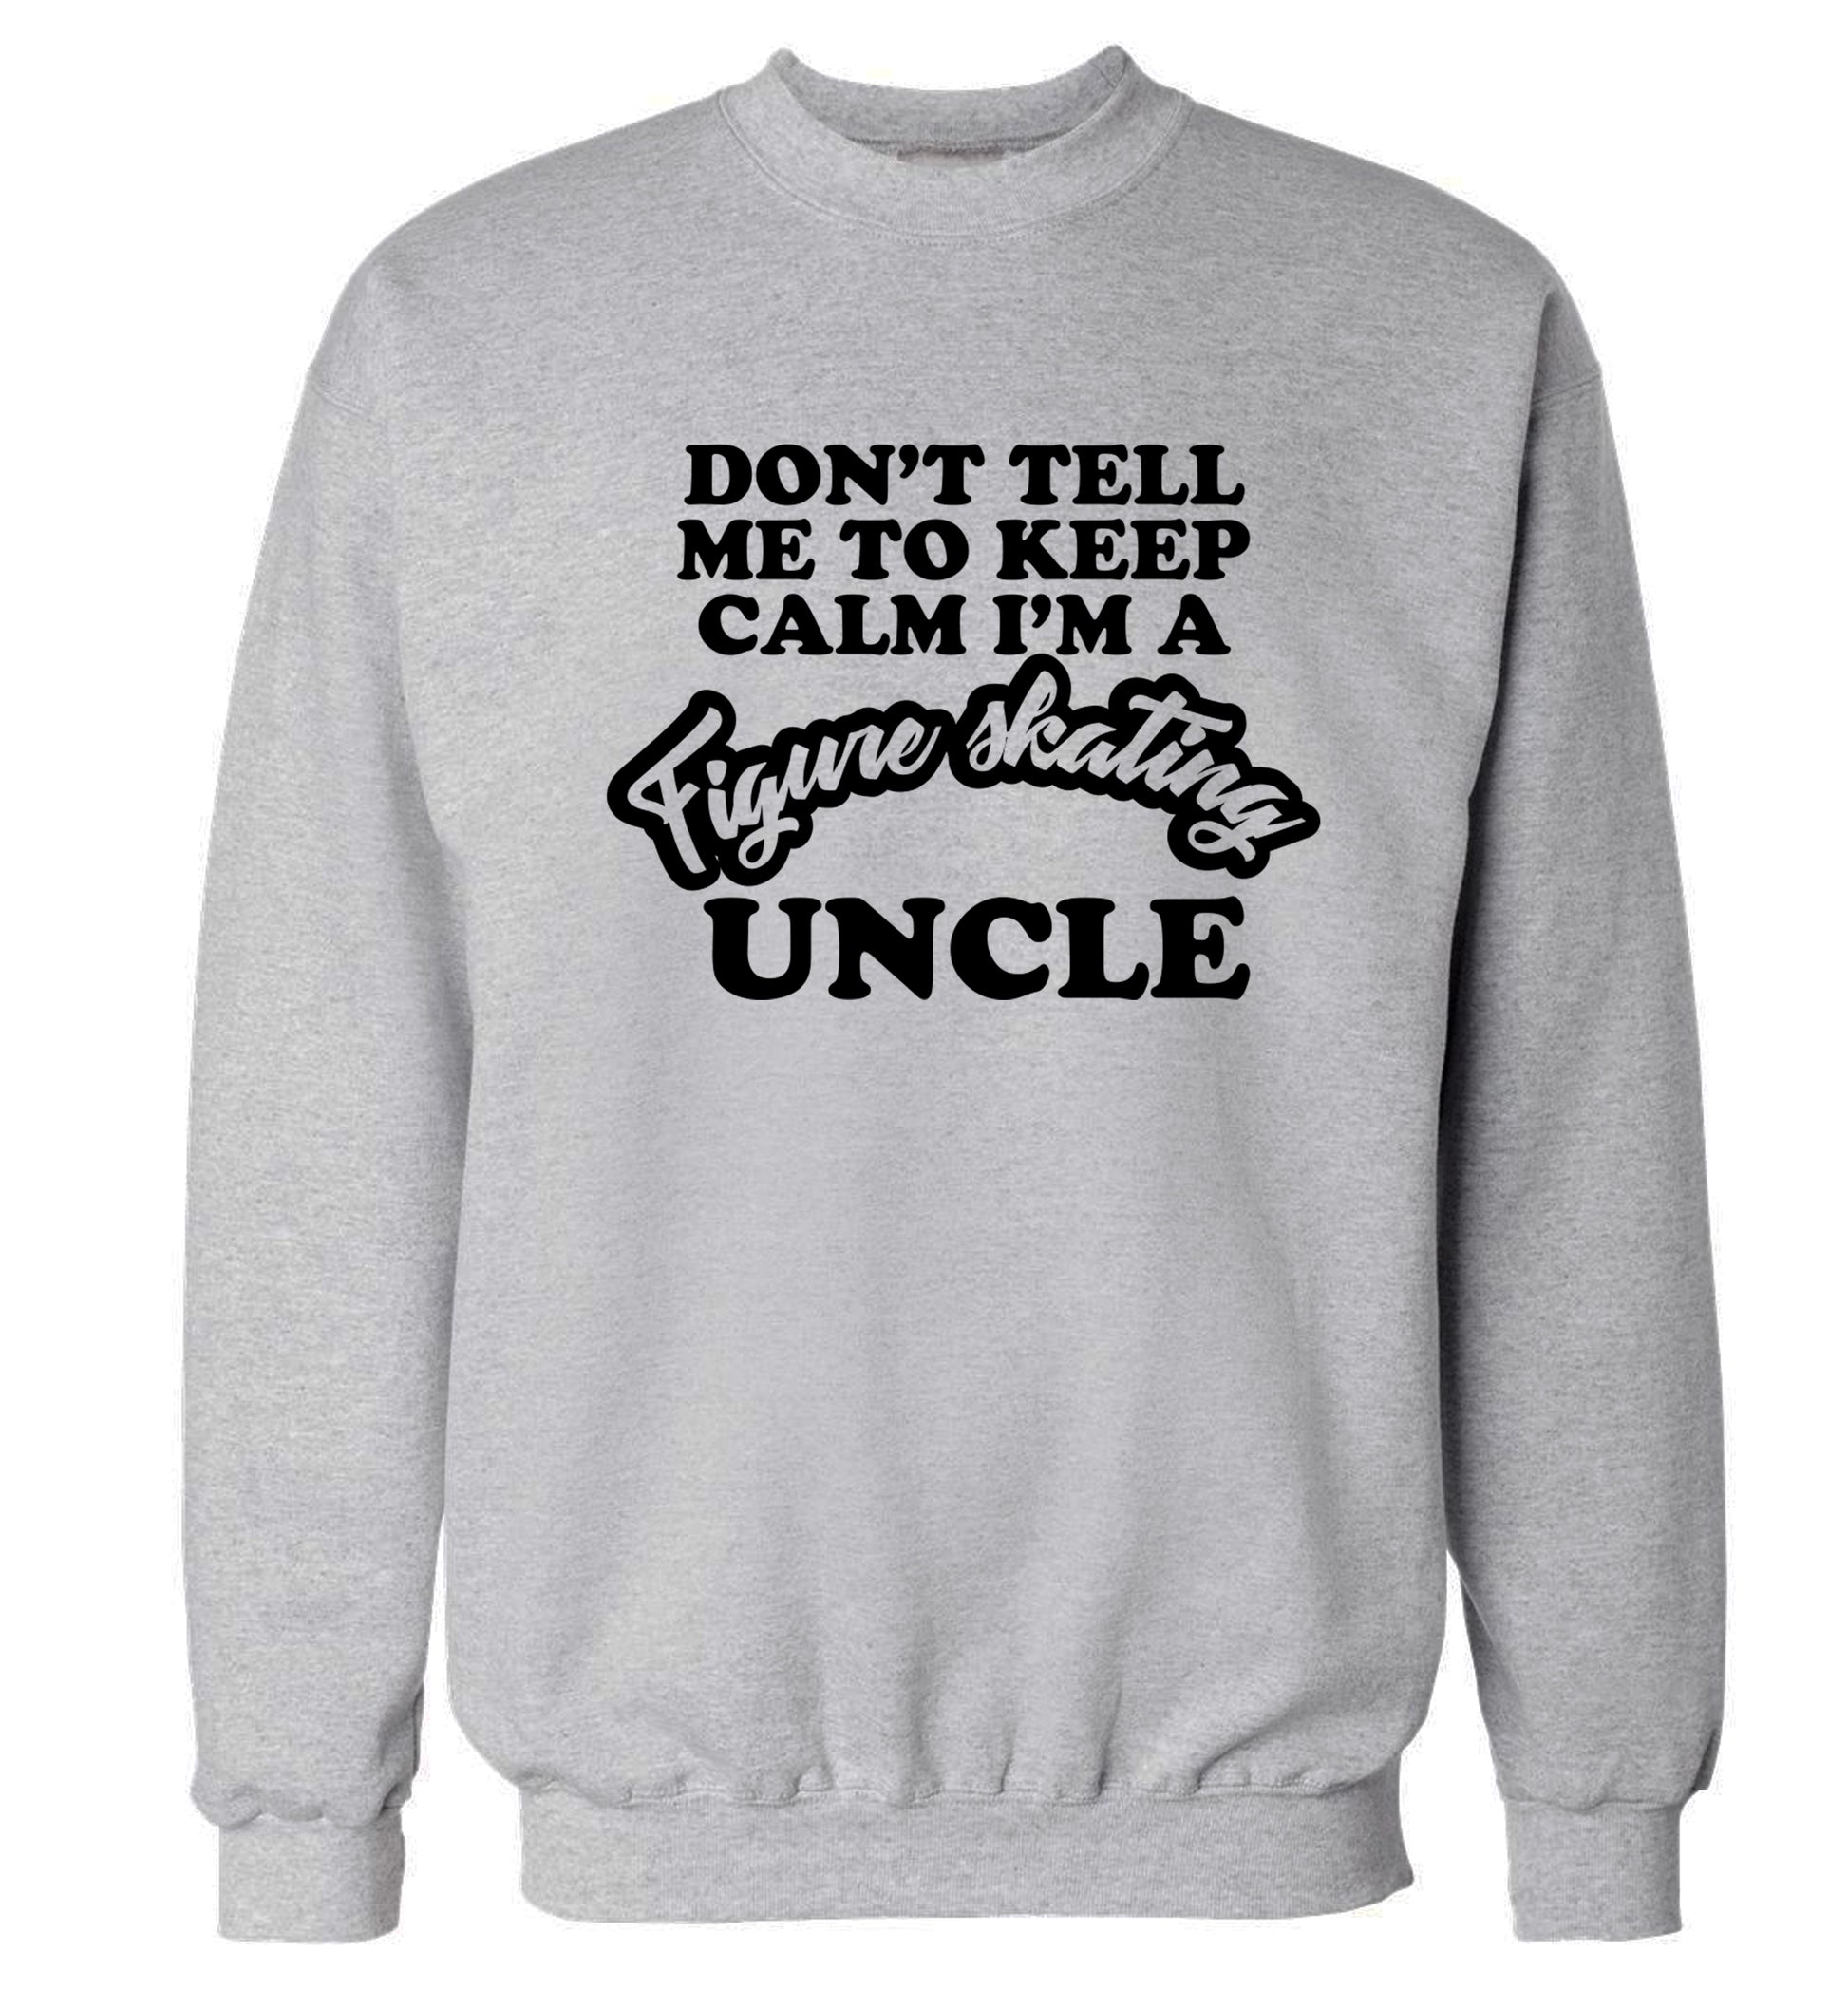 Don't tell me to keep calm I'm a figure skating uncle Adult's unisexgrey Sweater 2XL